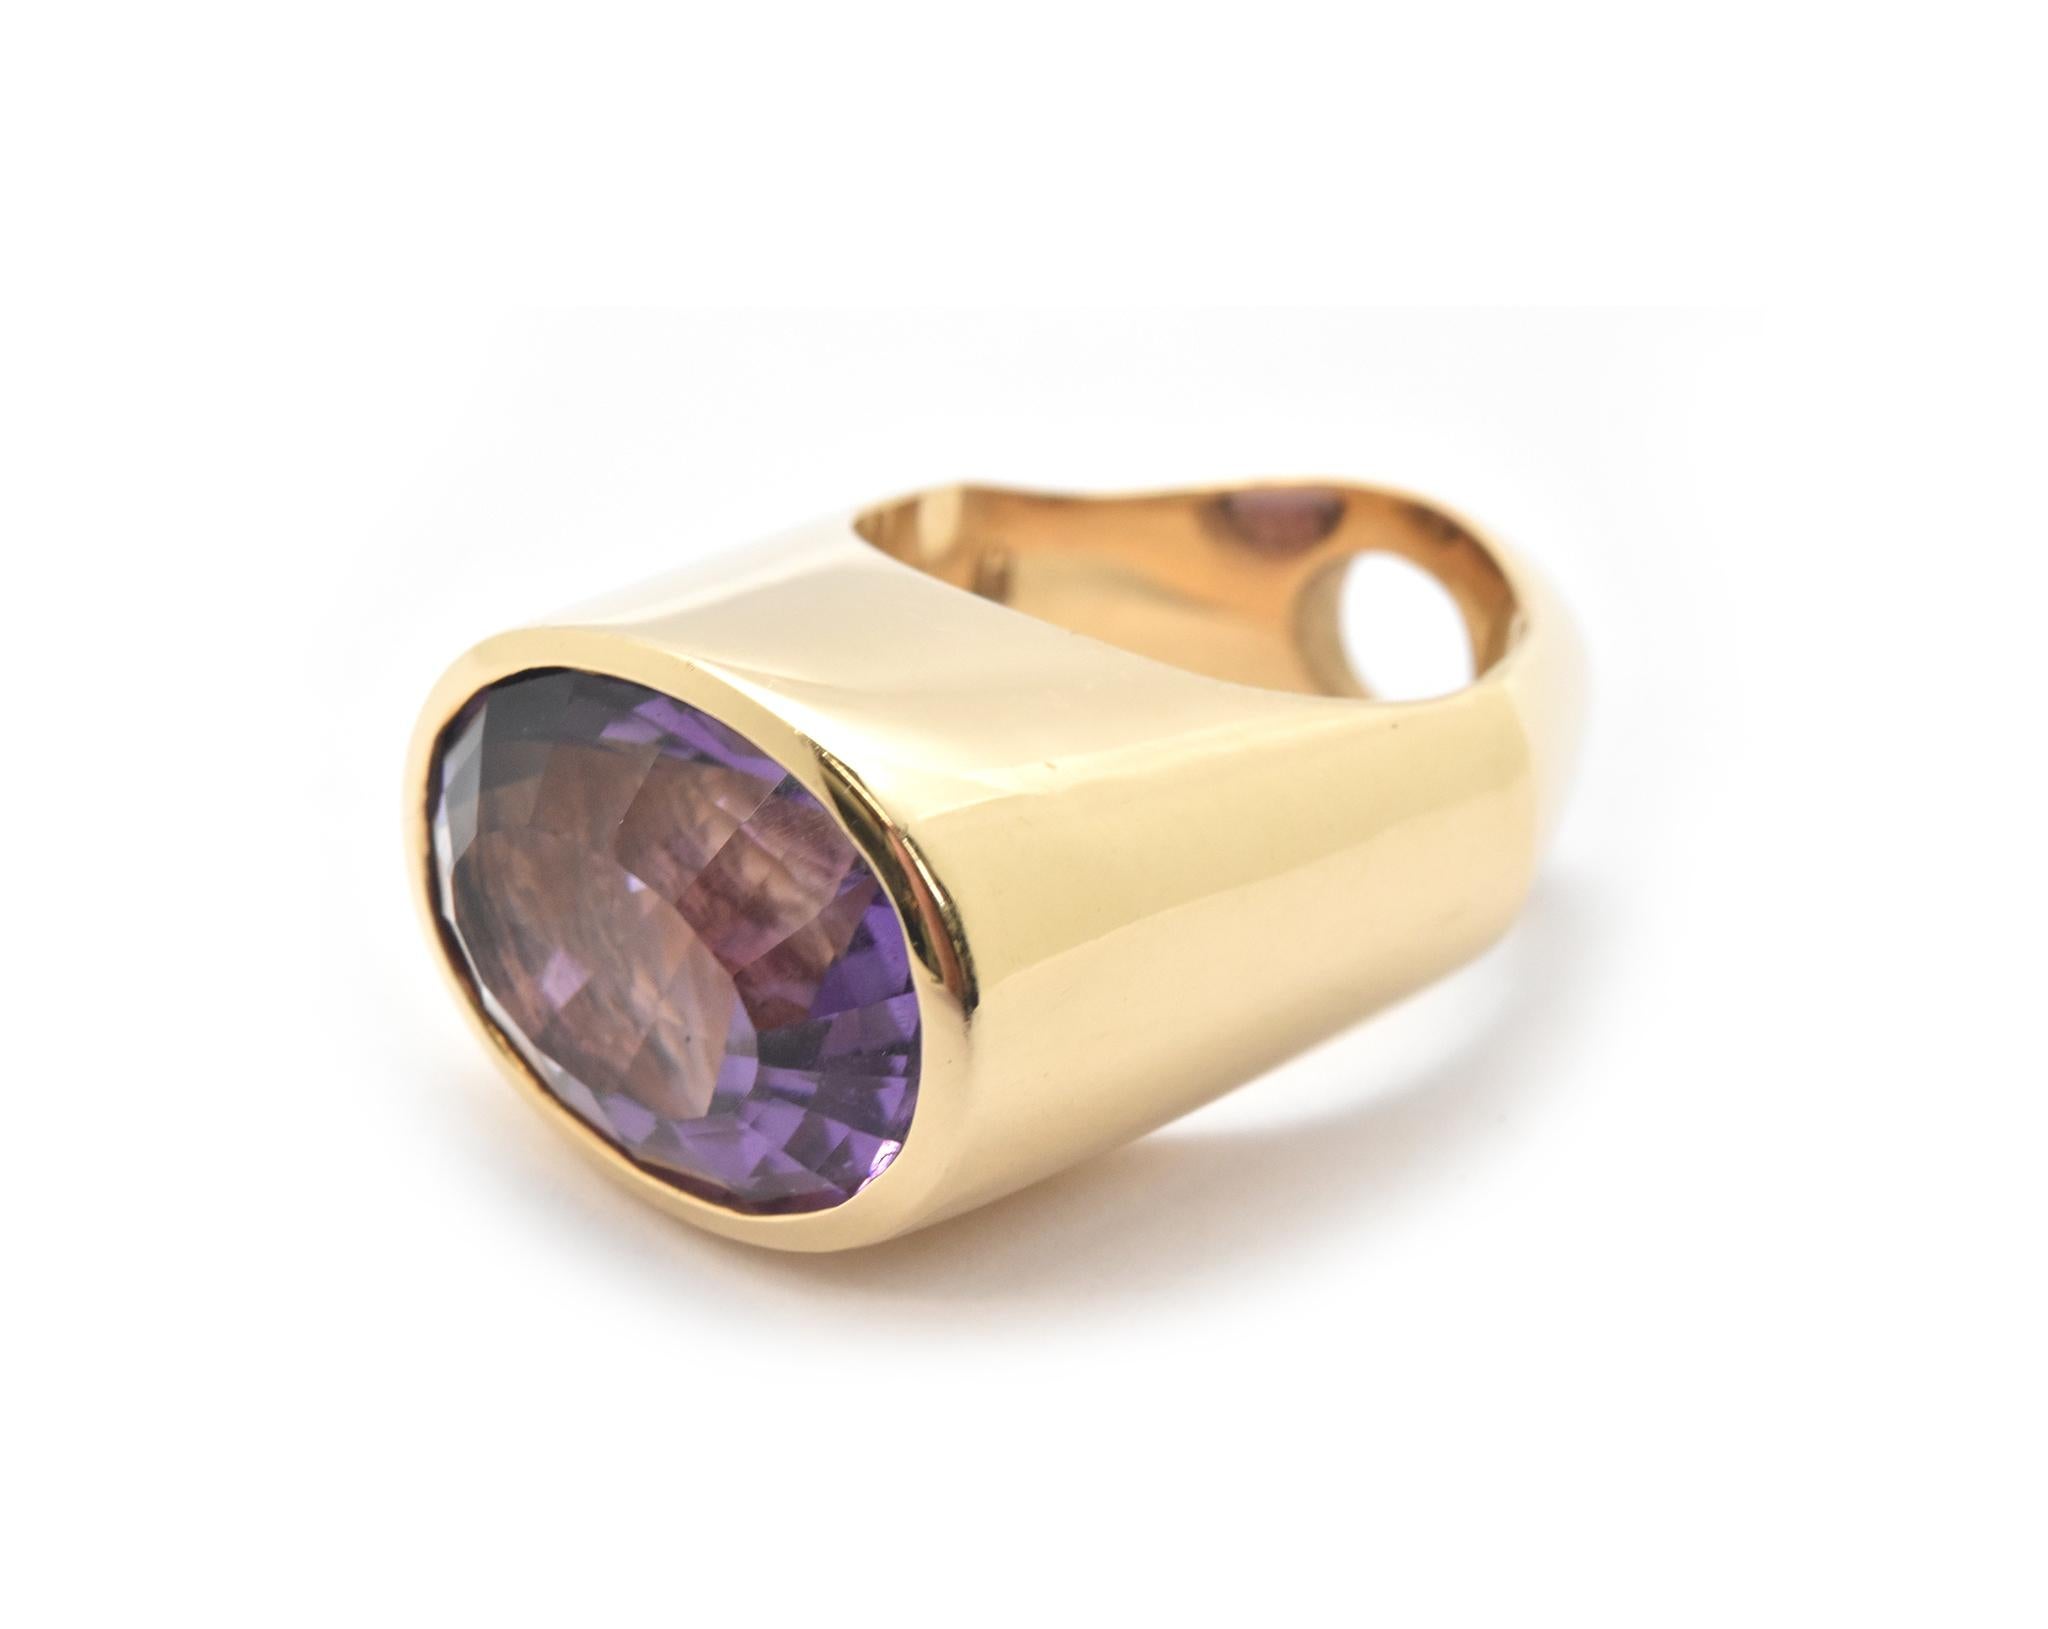 This ring is made in 14k yellow gold and set with a mixed oval cut 10ct amethyst by designer Gauthier. The band on this ring is beveled at each side of the shank. Band size is 4.75 and total weight of the ring is 22.81 grams.